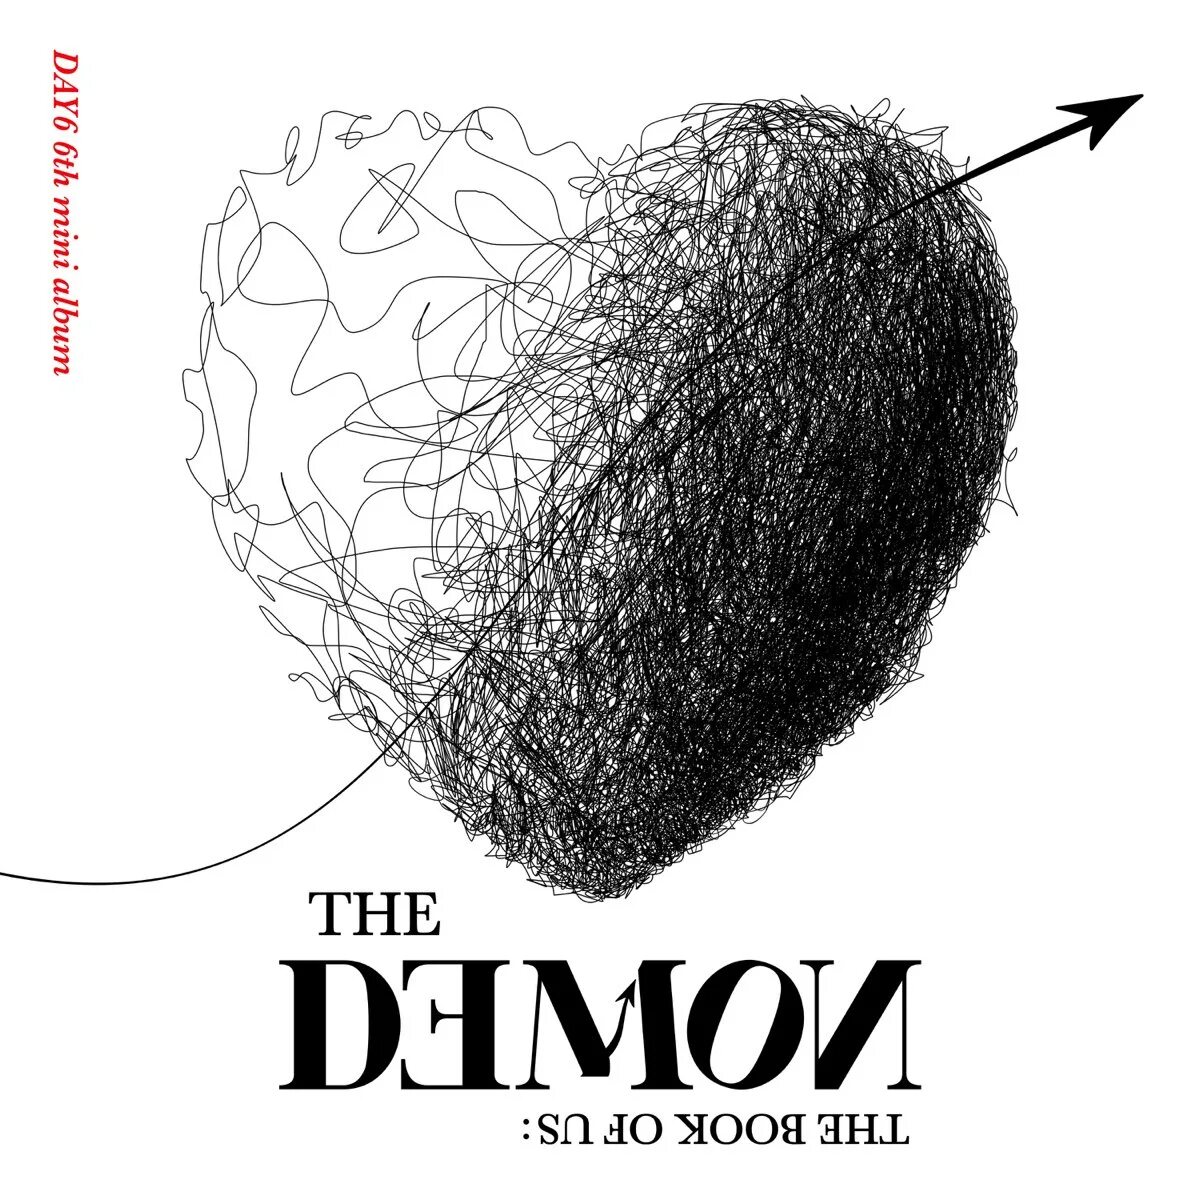 Day6 the book of us the Demon. Day6 album. Альбом day6 Demon. Day6 the bookof us обложка альбома. Cover day6